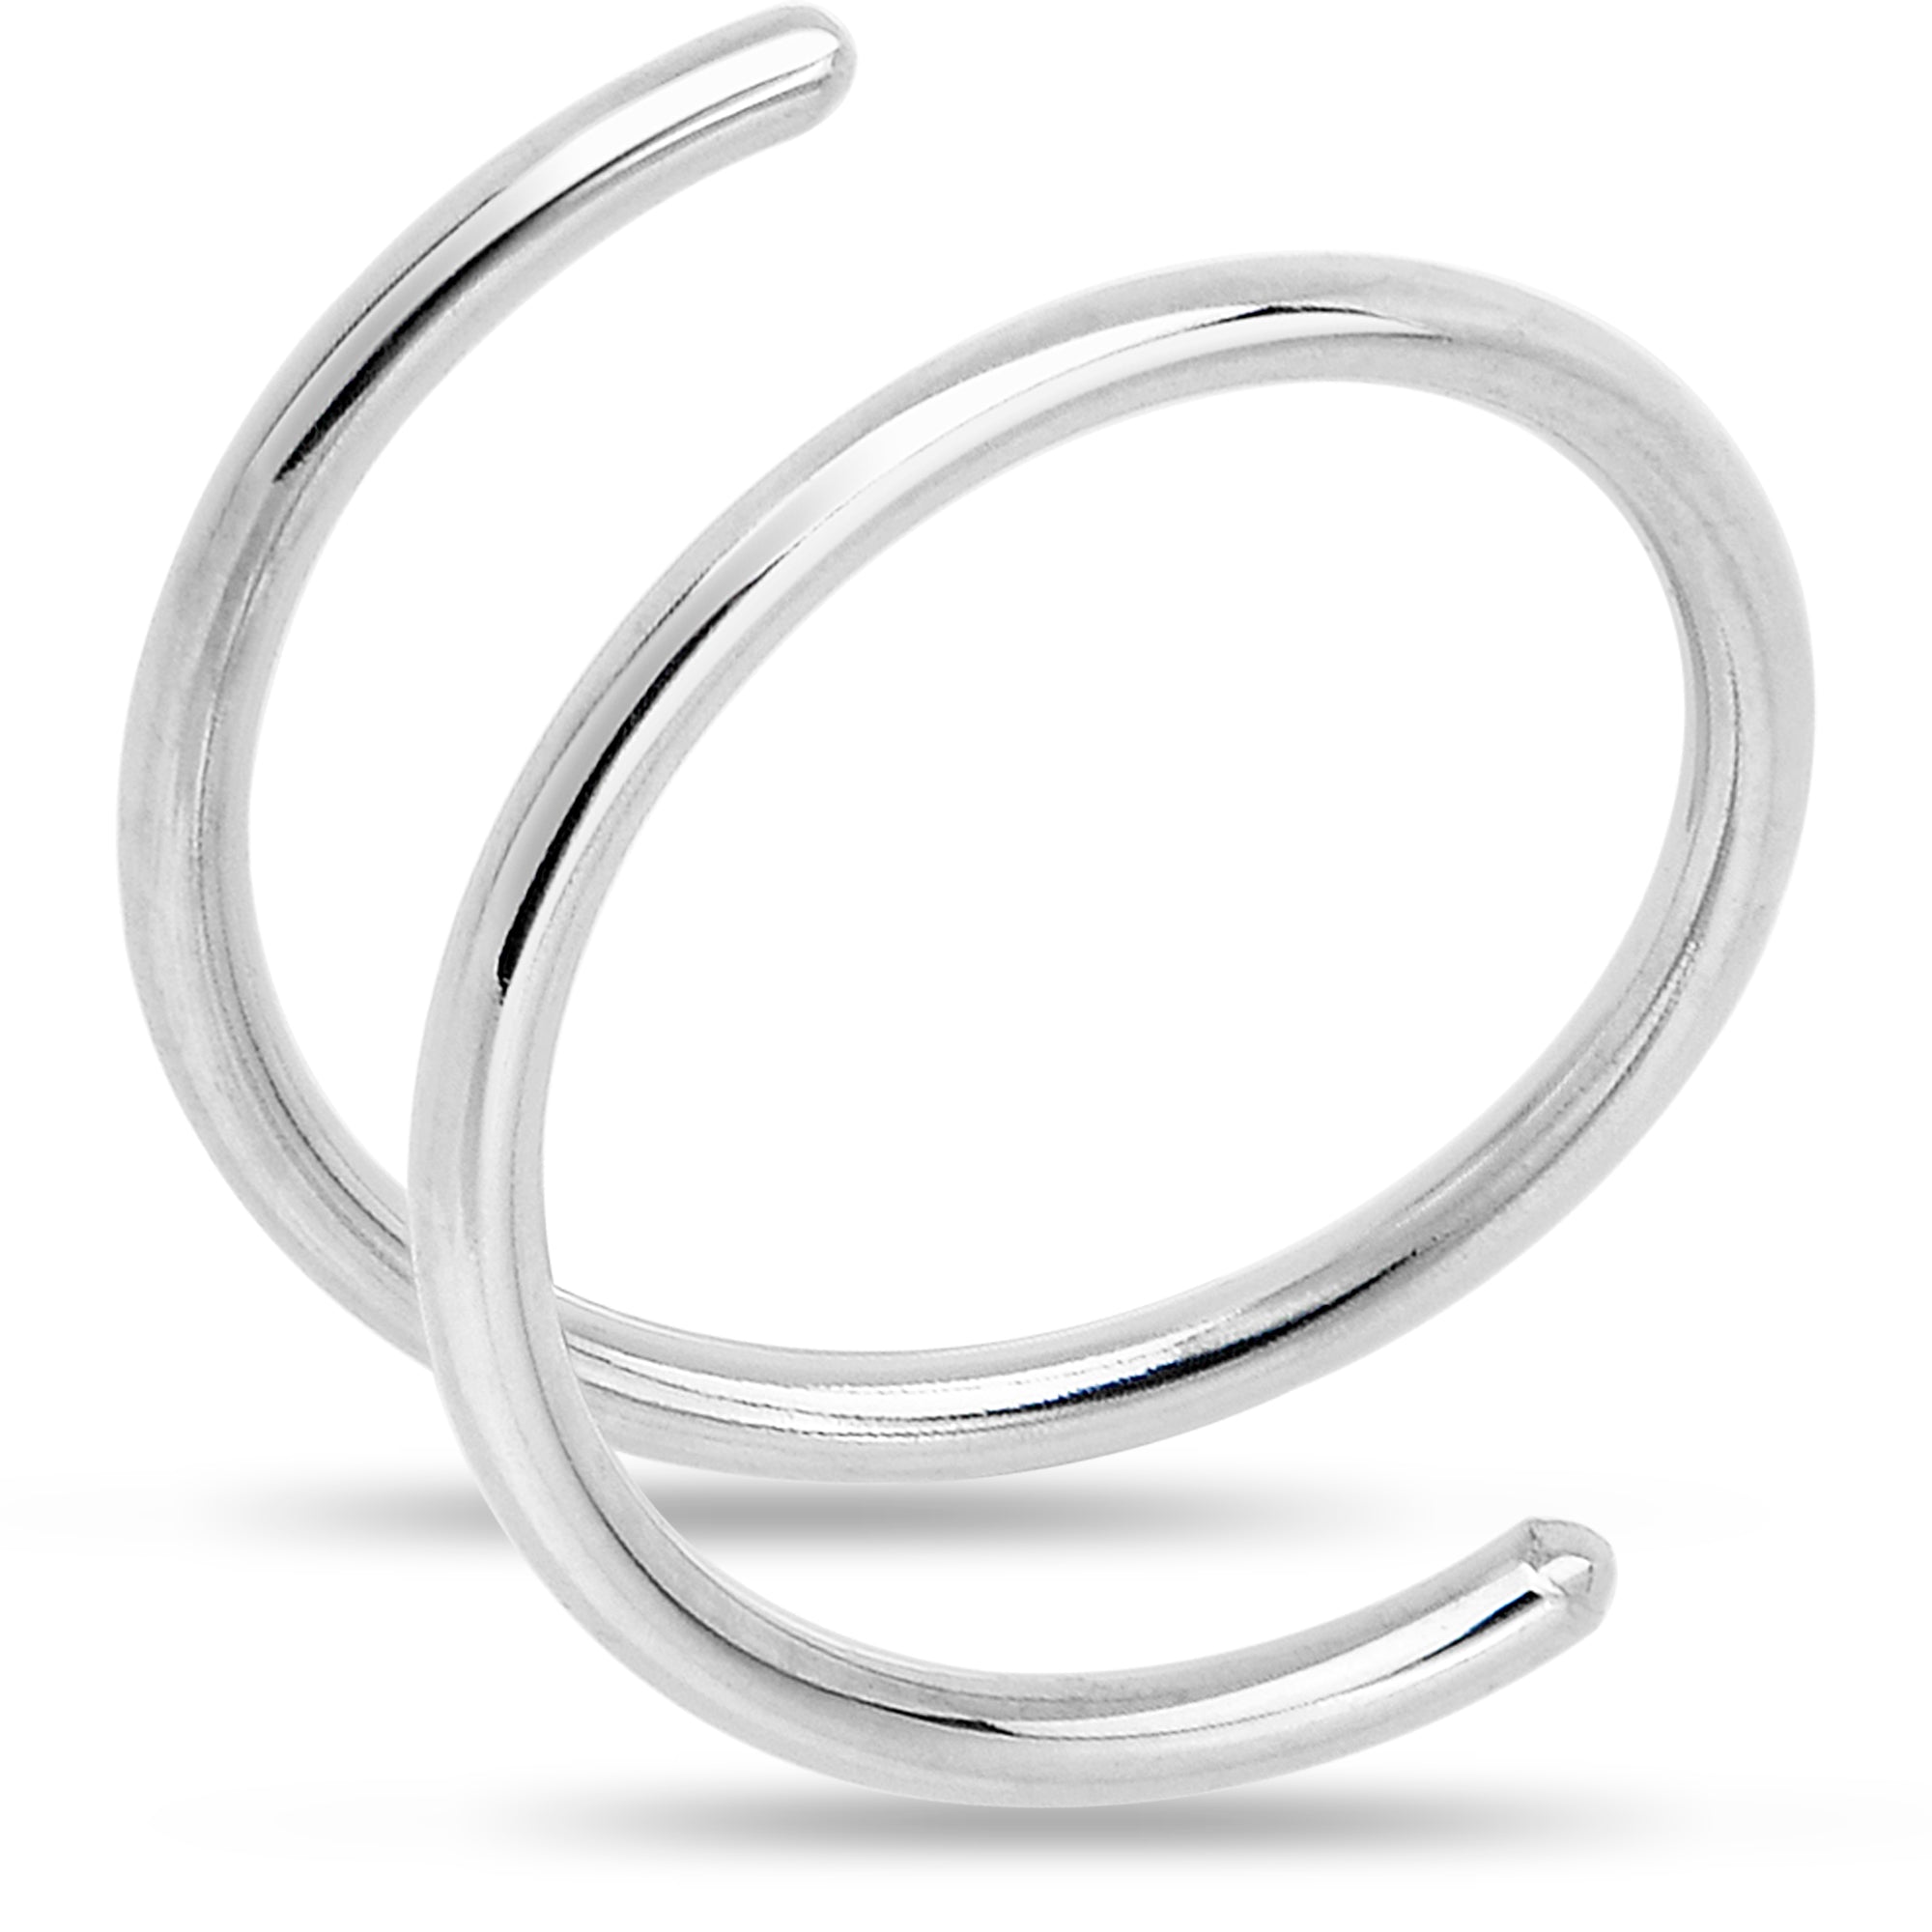 Double Hoop Nose 925 Sterling Silver Spiral Nose Ring 20 Gauge 8mm Right